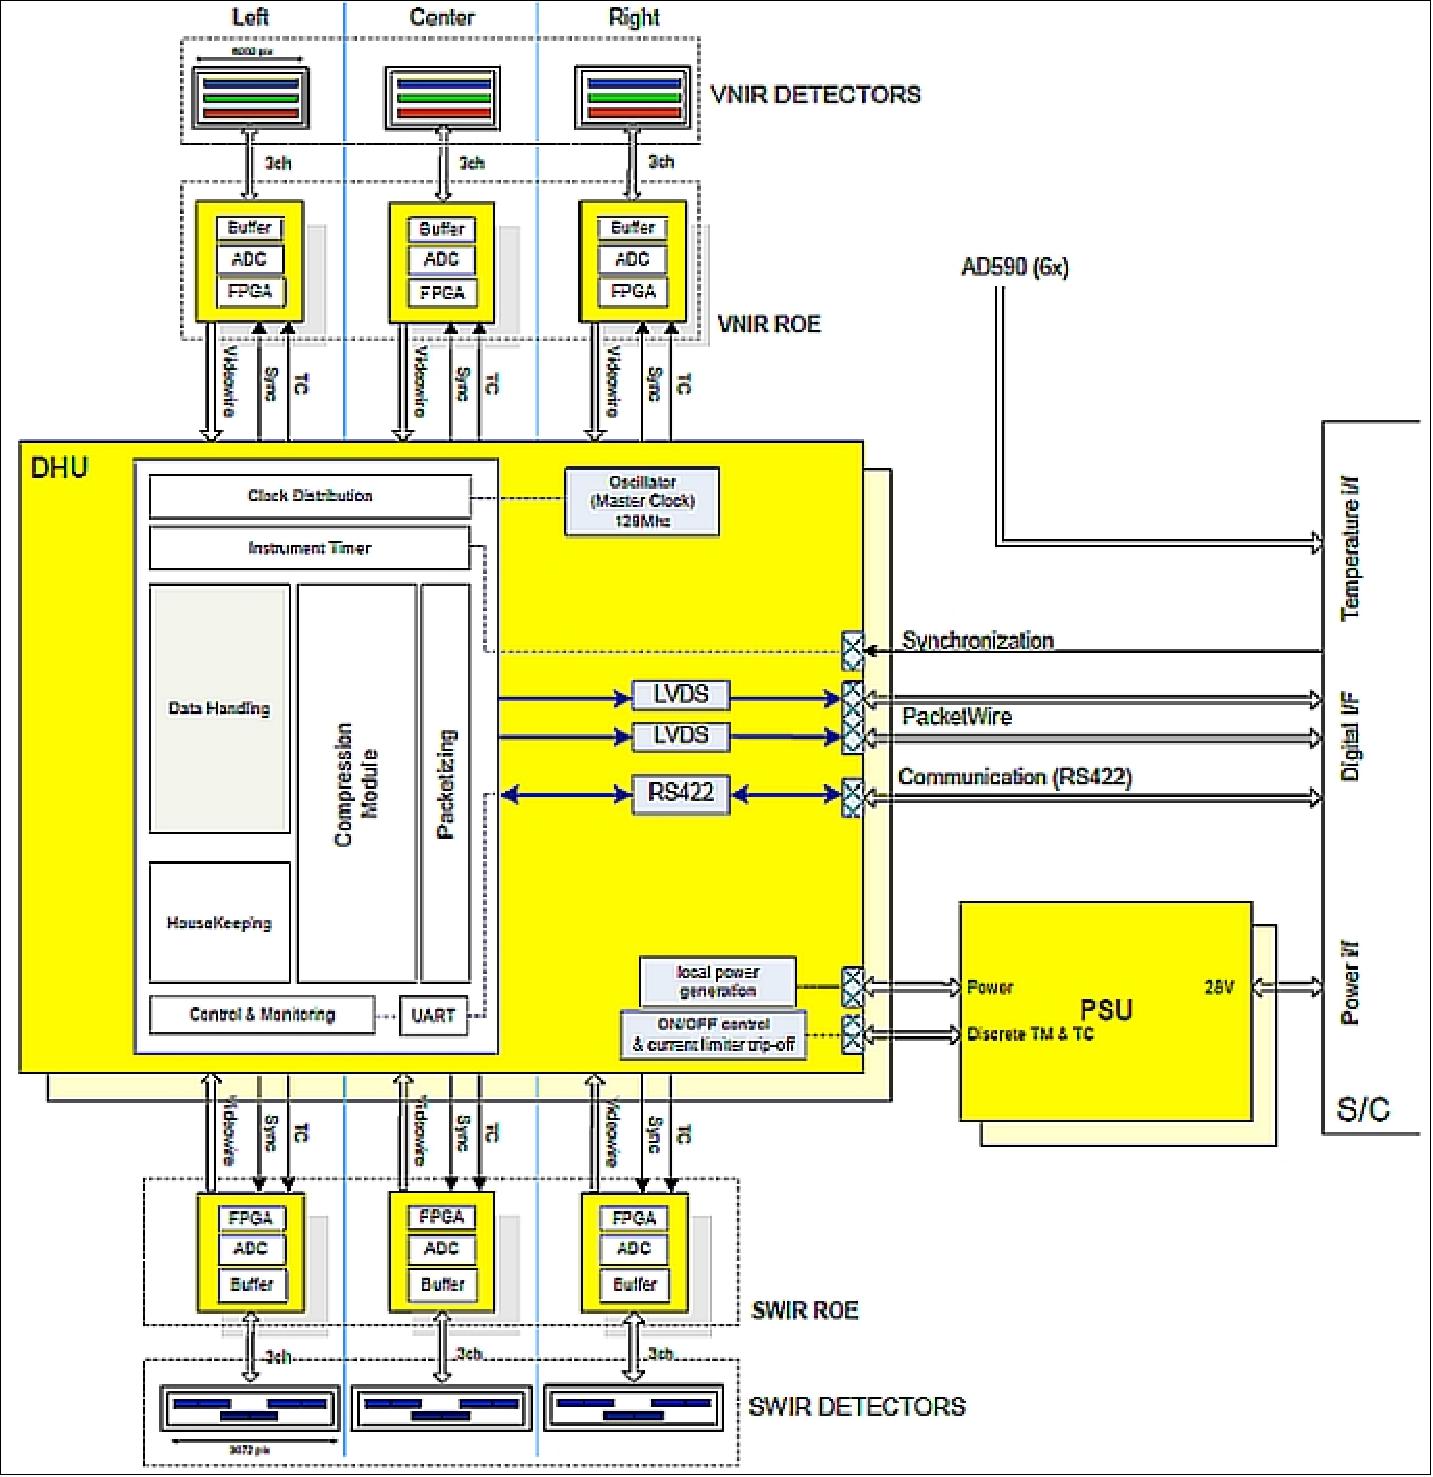 Figure 78: Architectural layout of the electronics design (image credit: OIP, ESA)